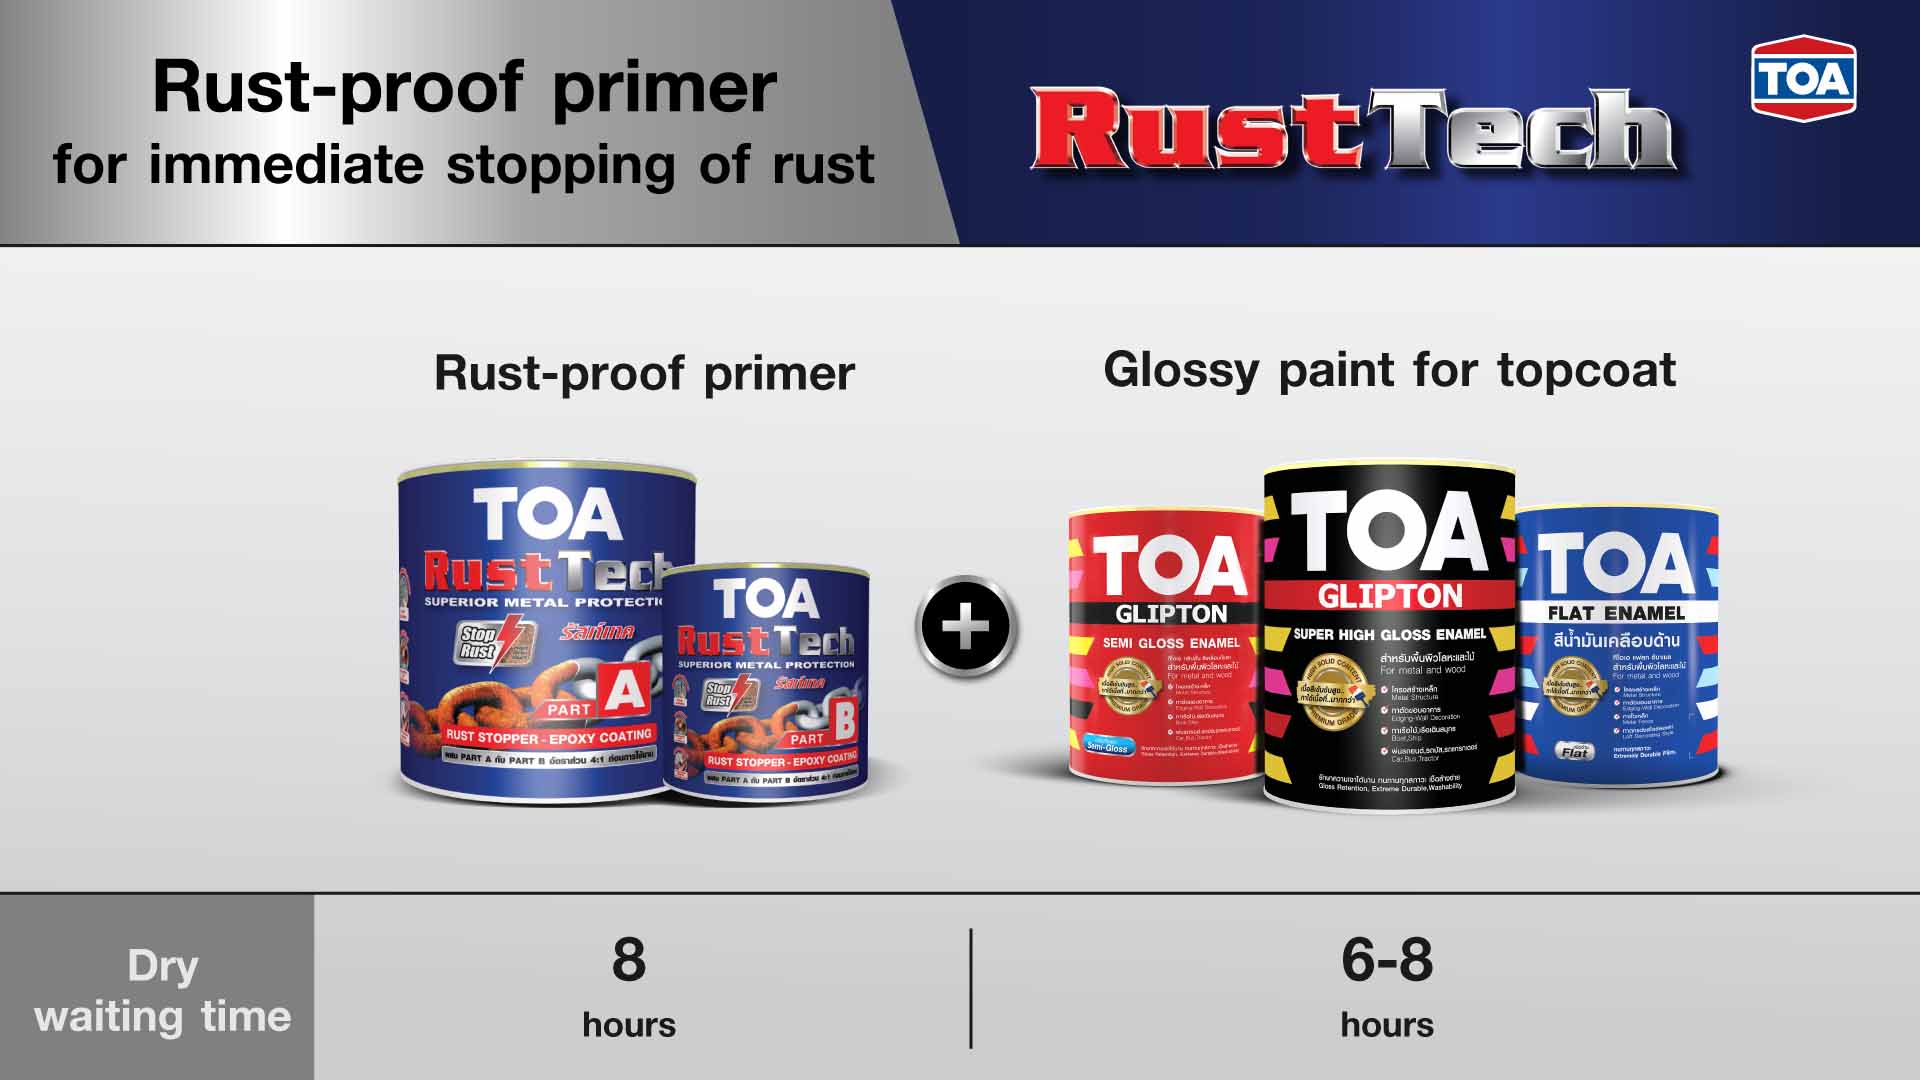 The system to apply TOA Rust Tech primer and TOA Glipton topcoat paint